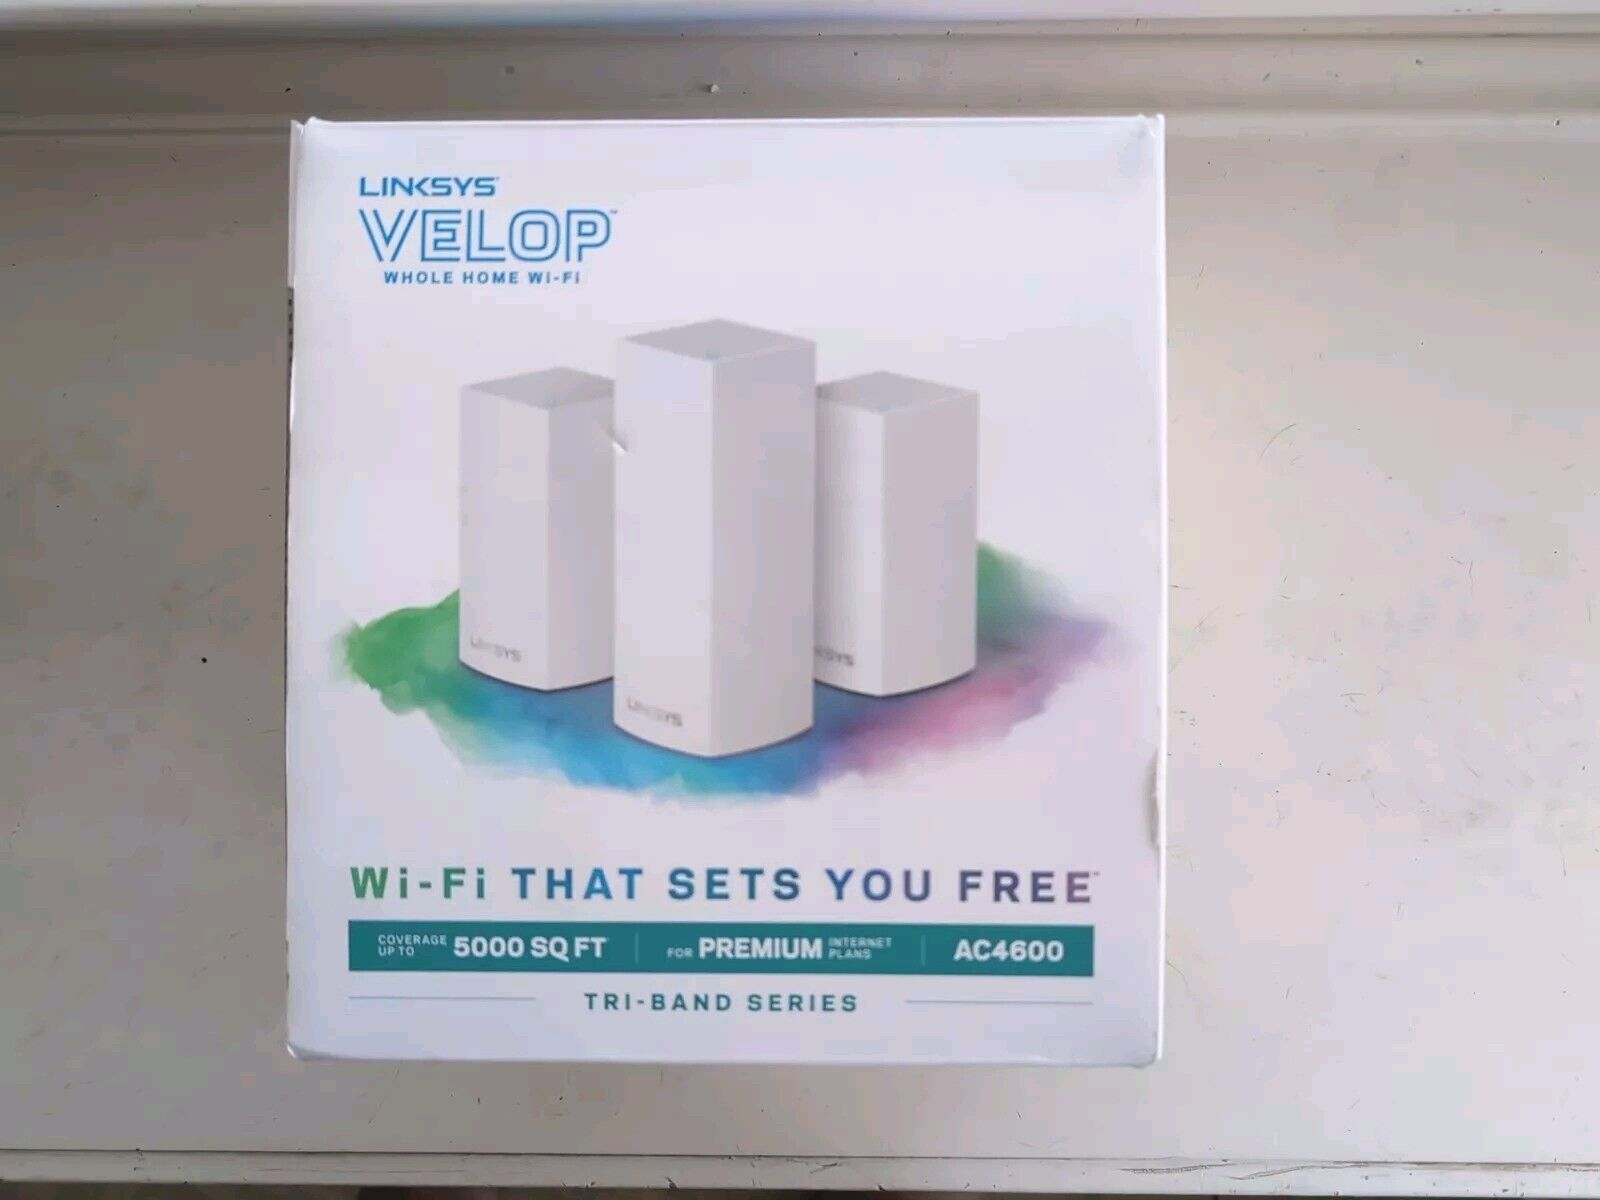 Linksys Velop Ac4600 Whole Home WiFi System Tri-band Series Vlp0203bf